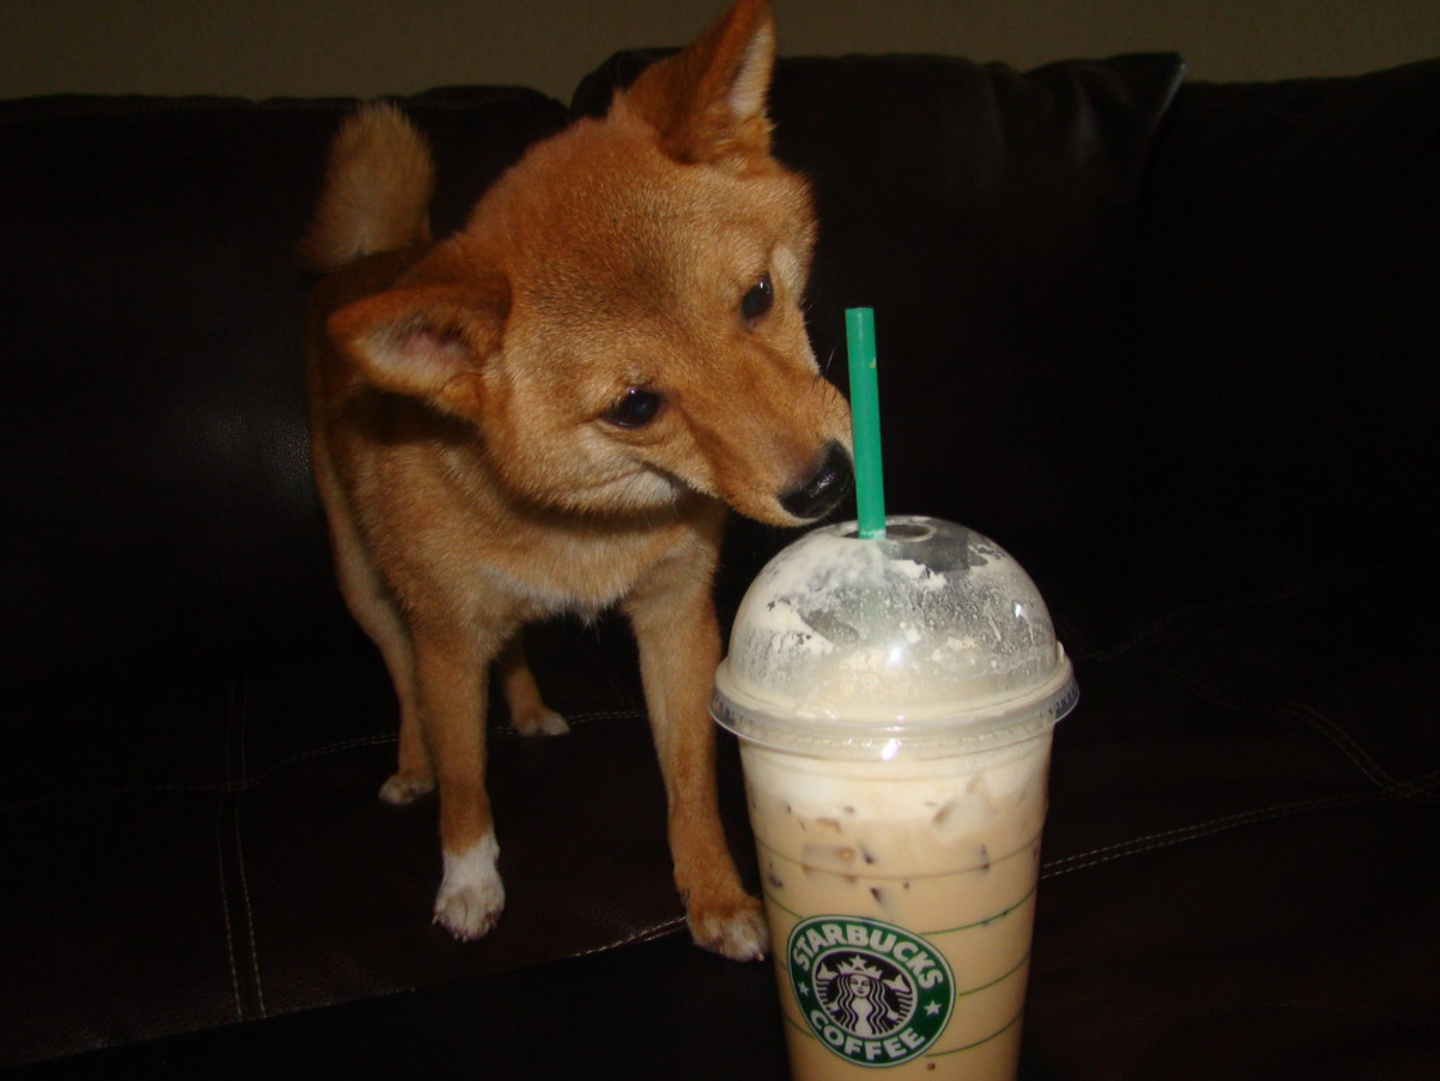 Puppuccino FAQ: What is a Starbucks Puppuccino made of?